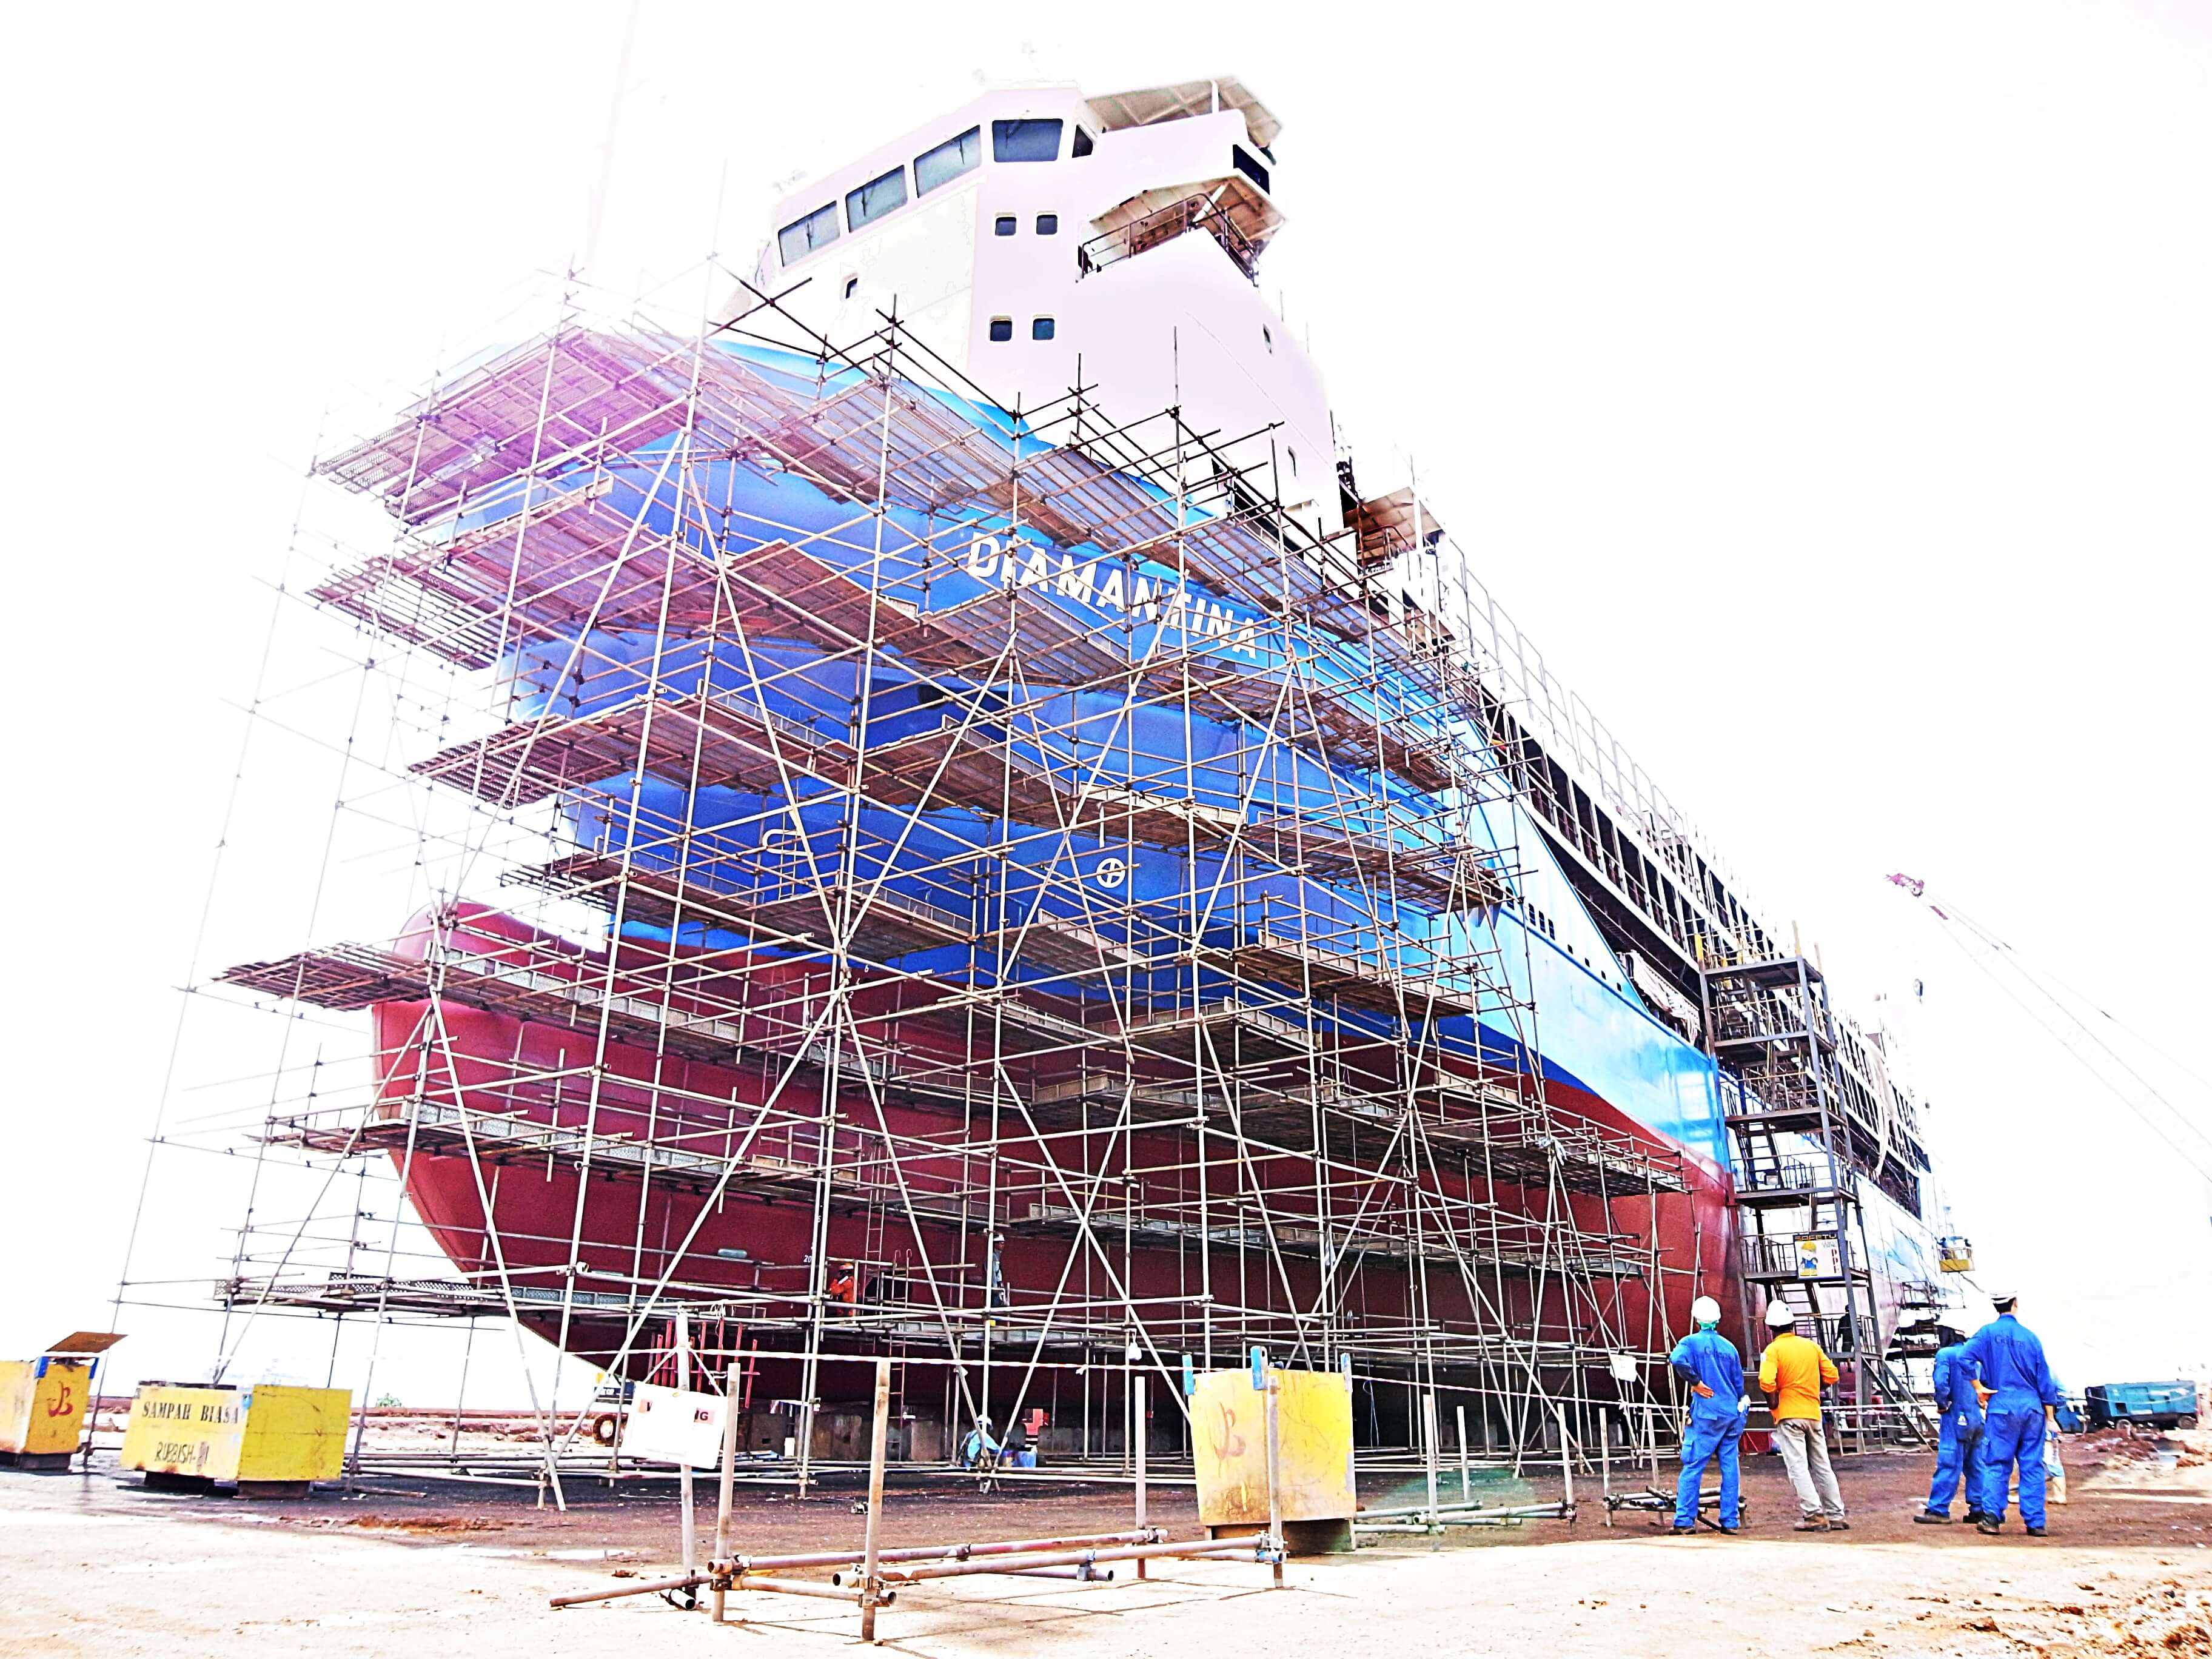 Vessel undergoing conversion to livestock carrier